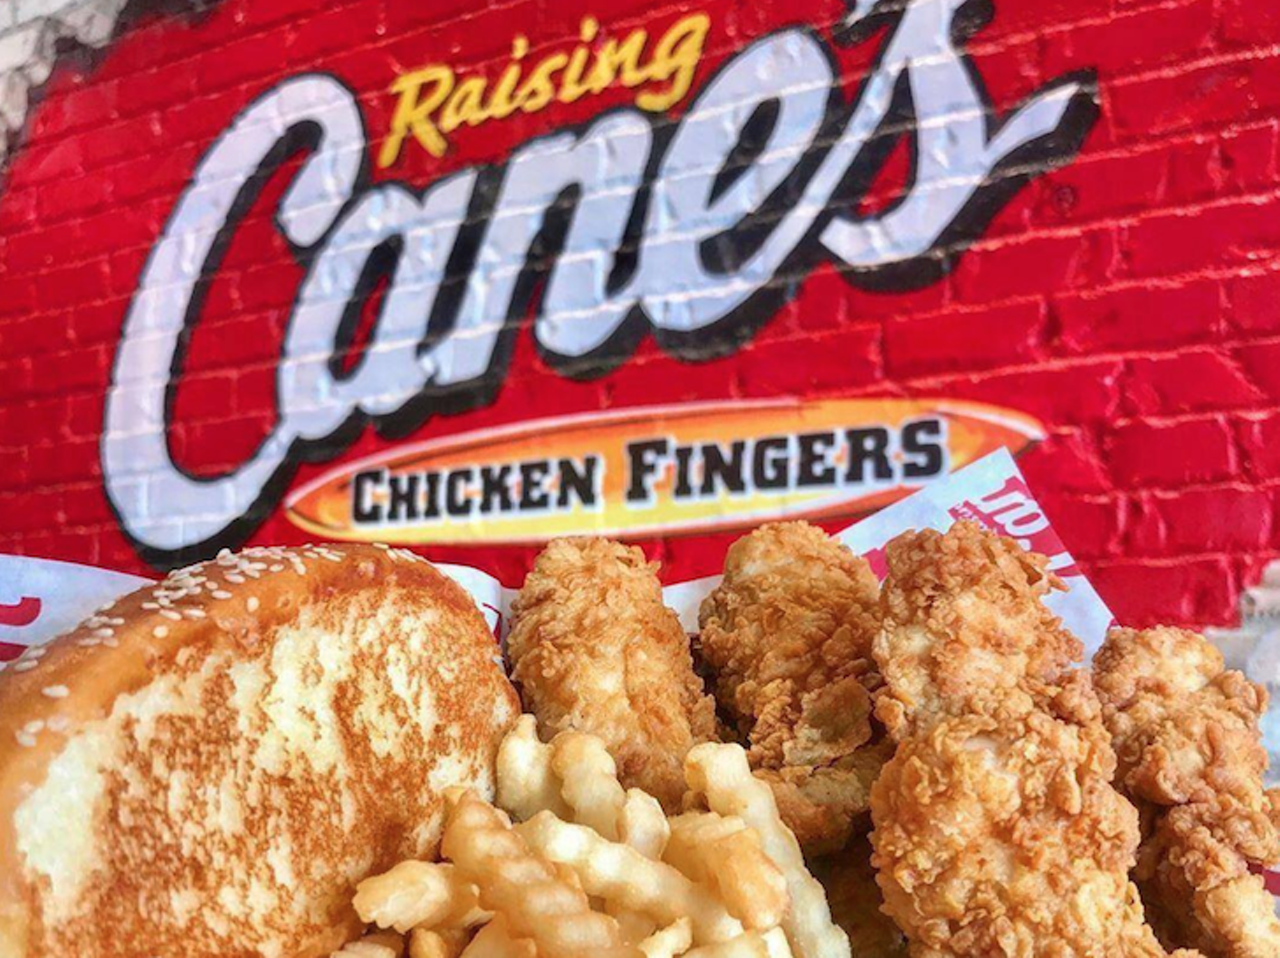 Raising Cane&#146;s Chicken Fingers 
Raising Cane&#146;s simple mission boils down to this: make the best chicken fingers and make them everywhere. The Louisiana-based chain doesn&#146;t fool around with food fads or extravagant creations. The menu is simple, but anything but plain with top-notch chicken fingers, fries, Texas toast and coleslaw. With Raising Cane&#146;s locations in every state bordering Florida but none in Florida itself, we just have one question: Are you mad at us?
Photo via Raising Cane&#146;s Chicken Fingers/Facebook